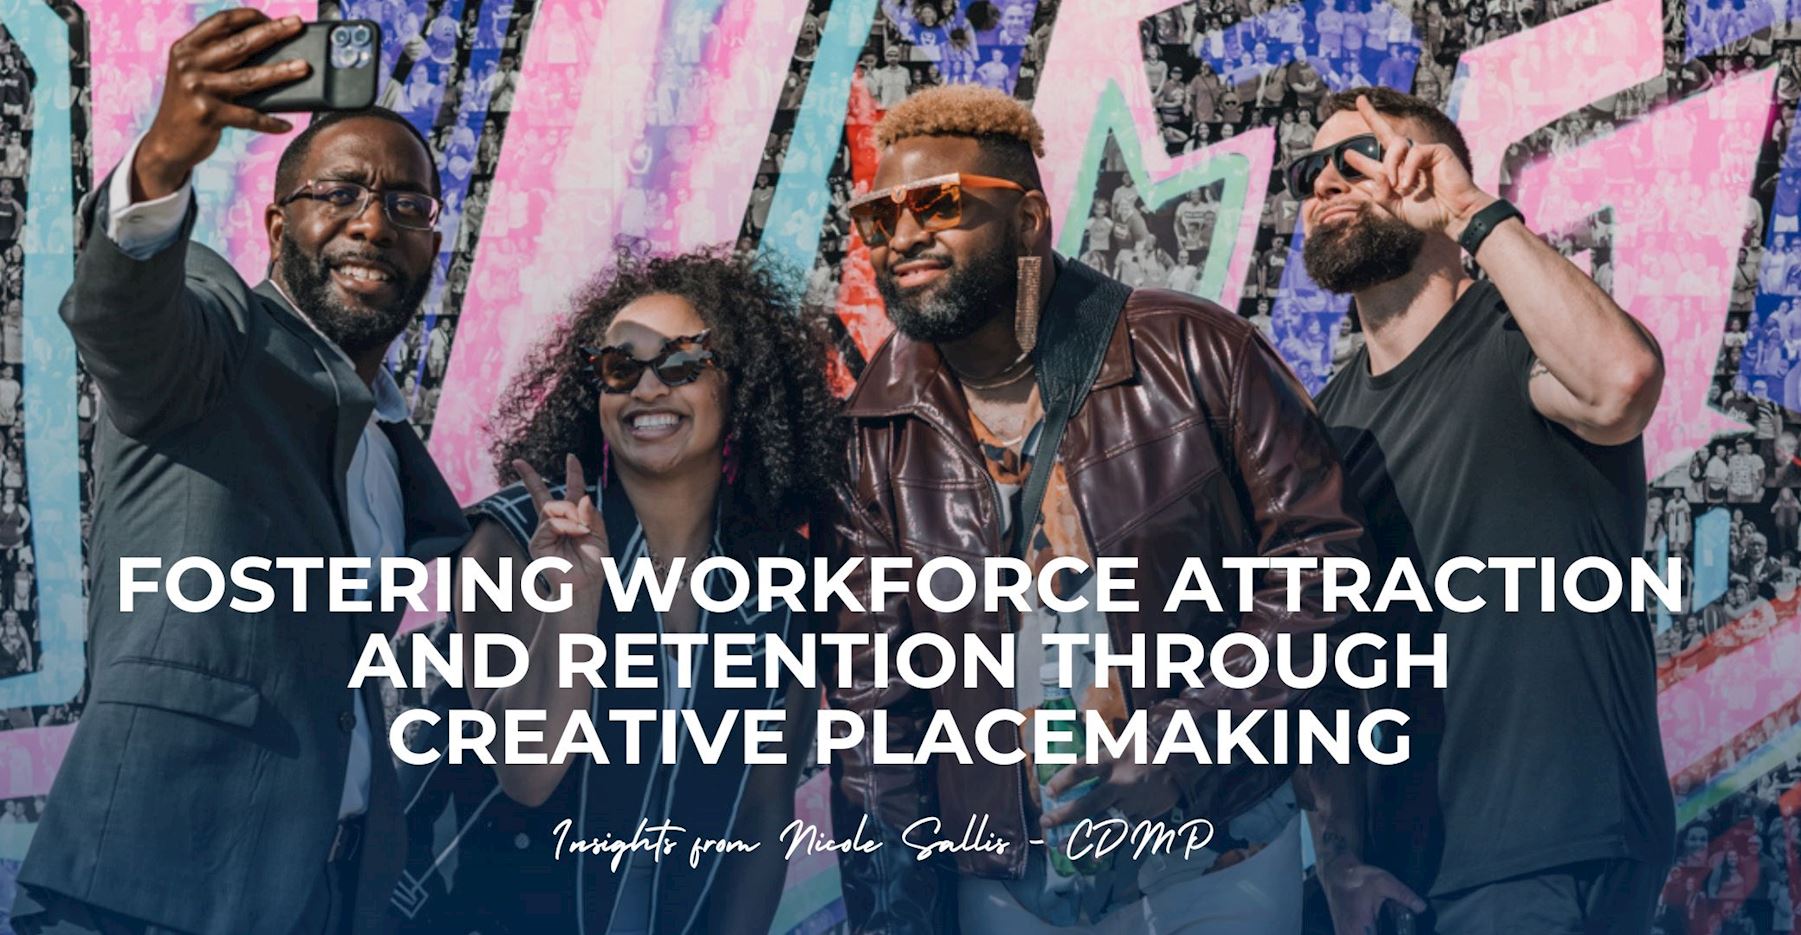 Fostering Workforce Attraction and Retention through Creative Placemaking